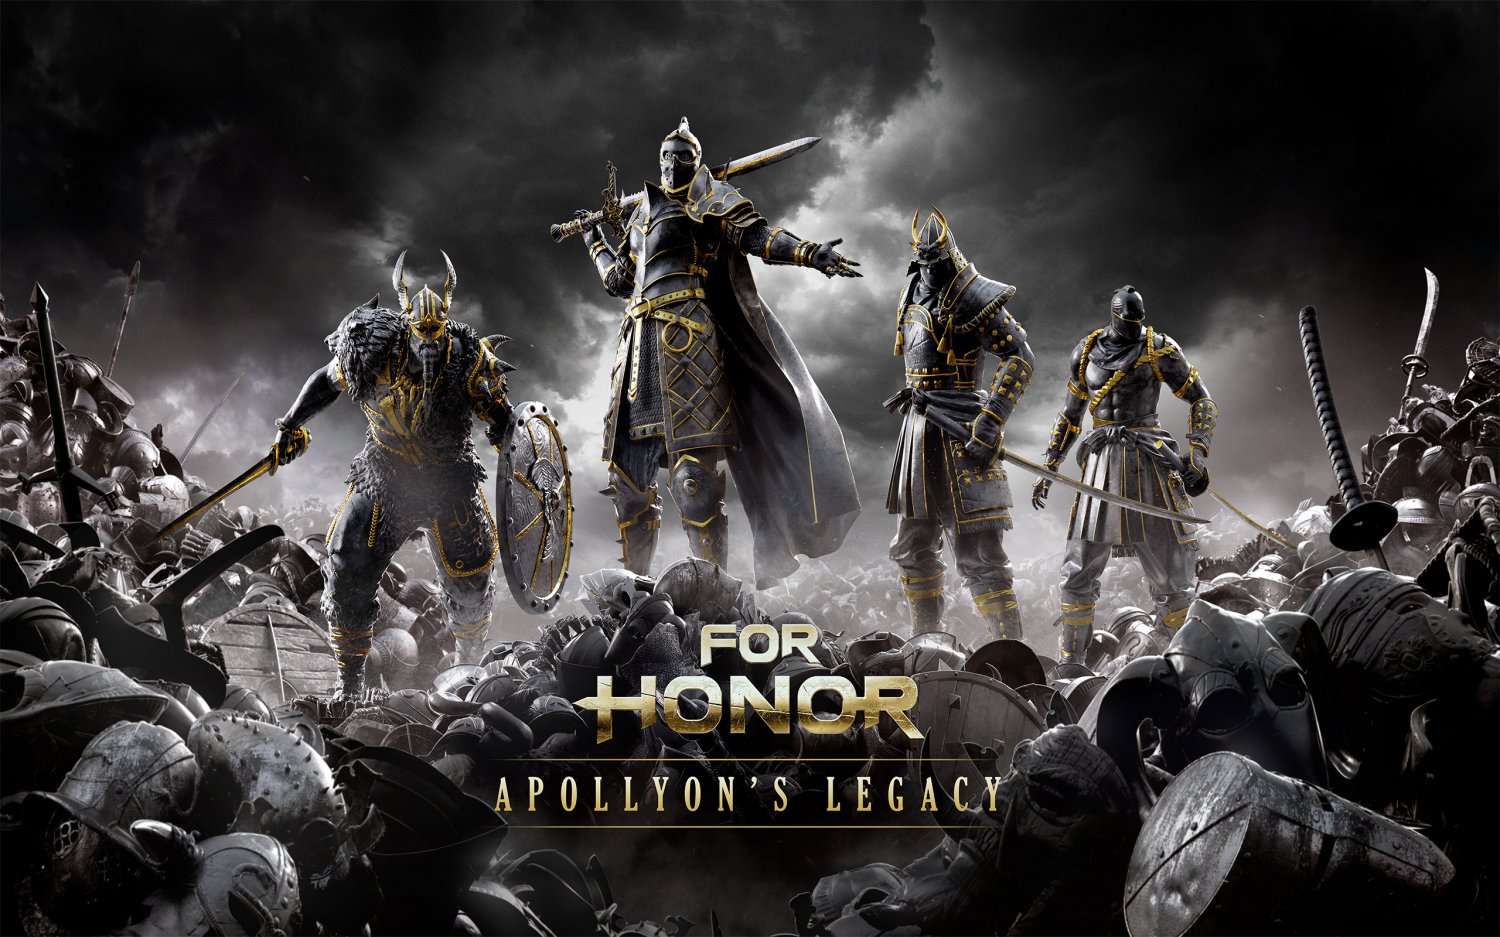 For Honor Apollyon's Legacy  18"x28" (45cm/70cm) Poster